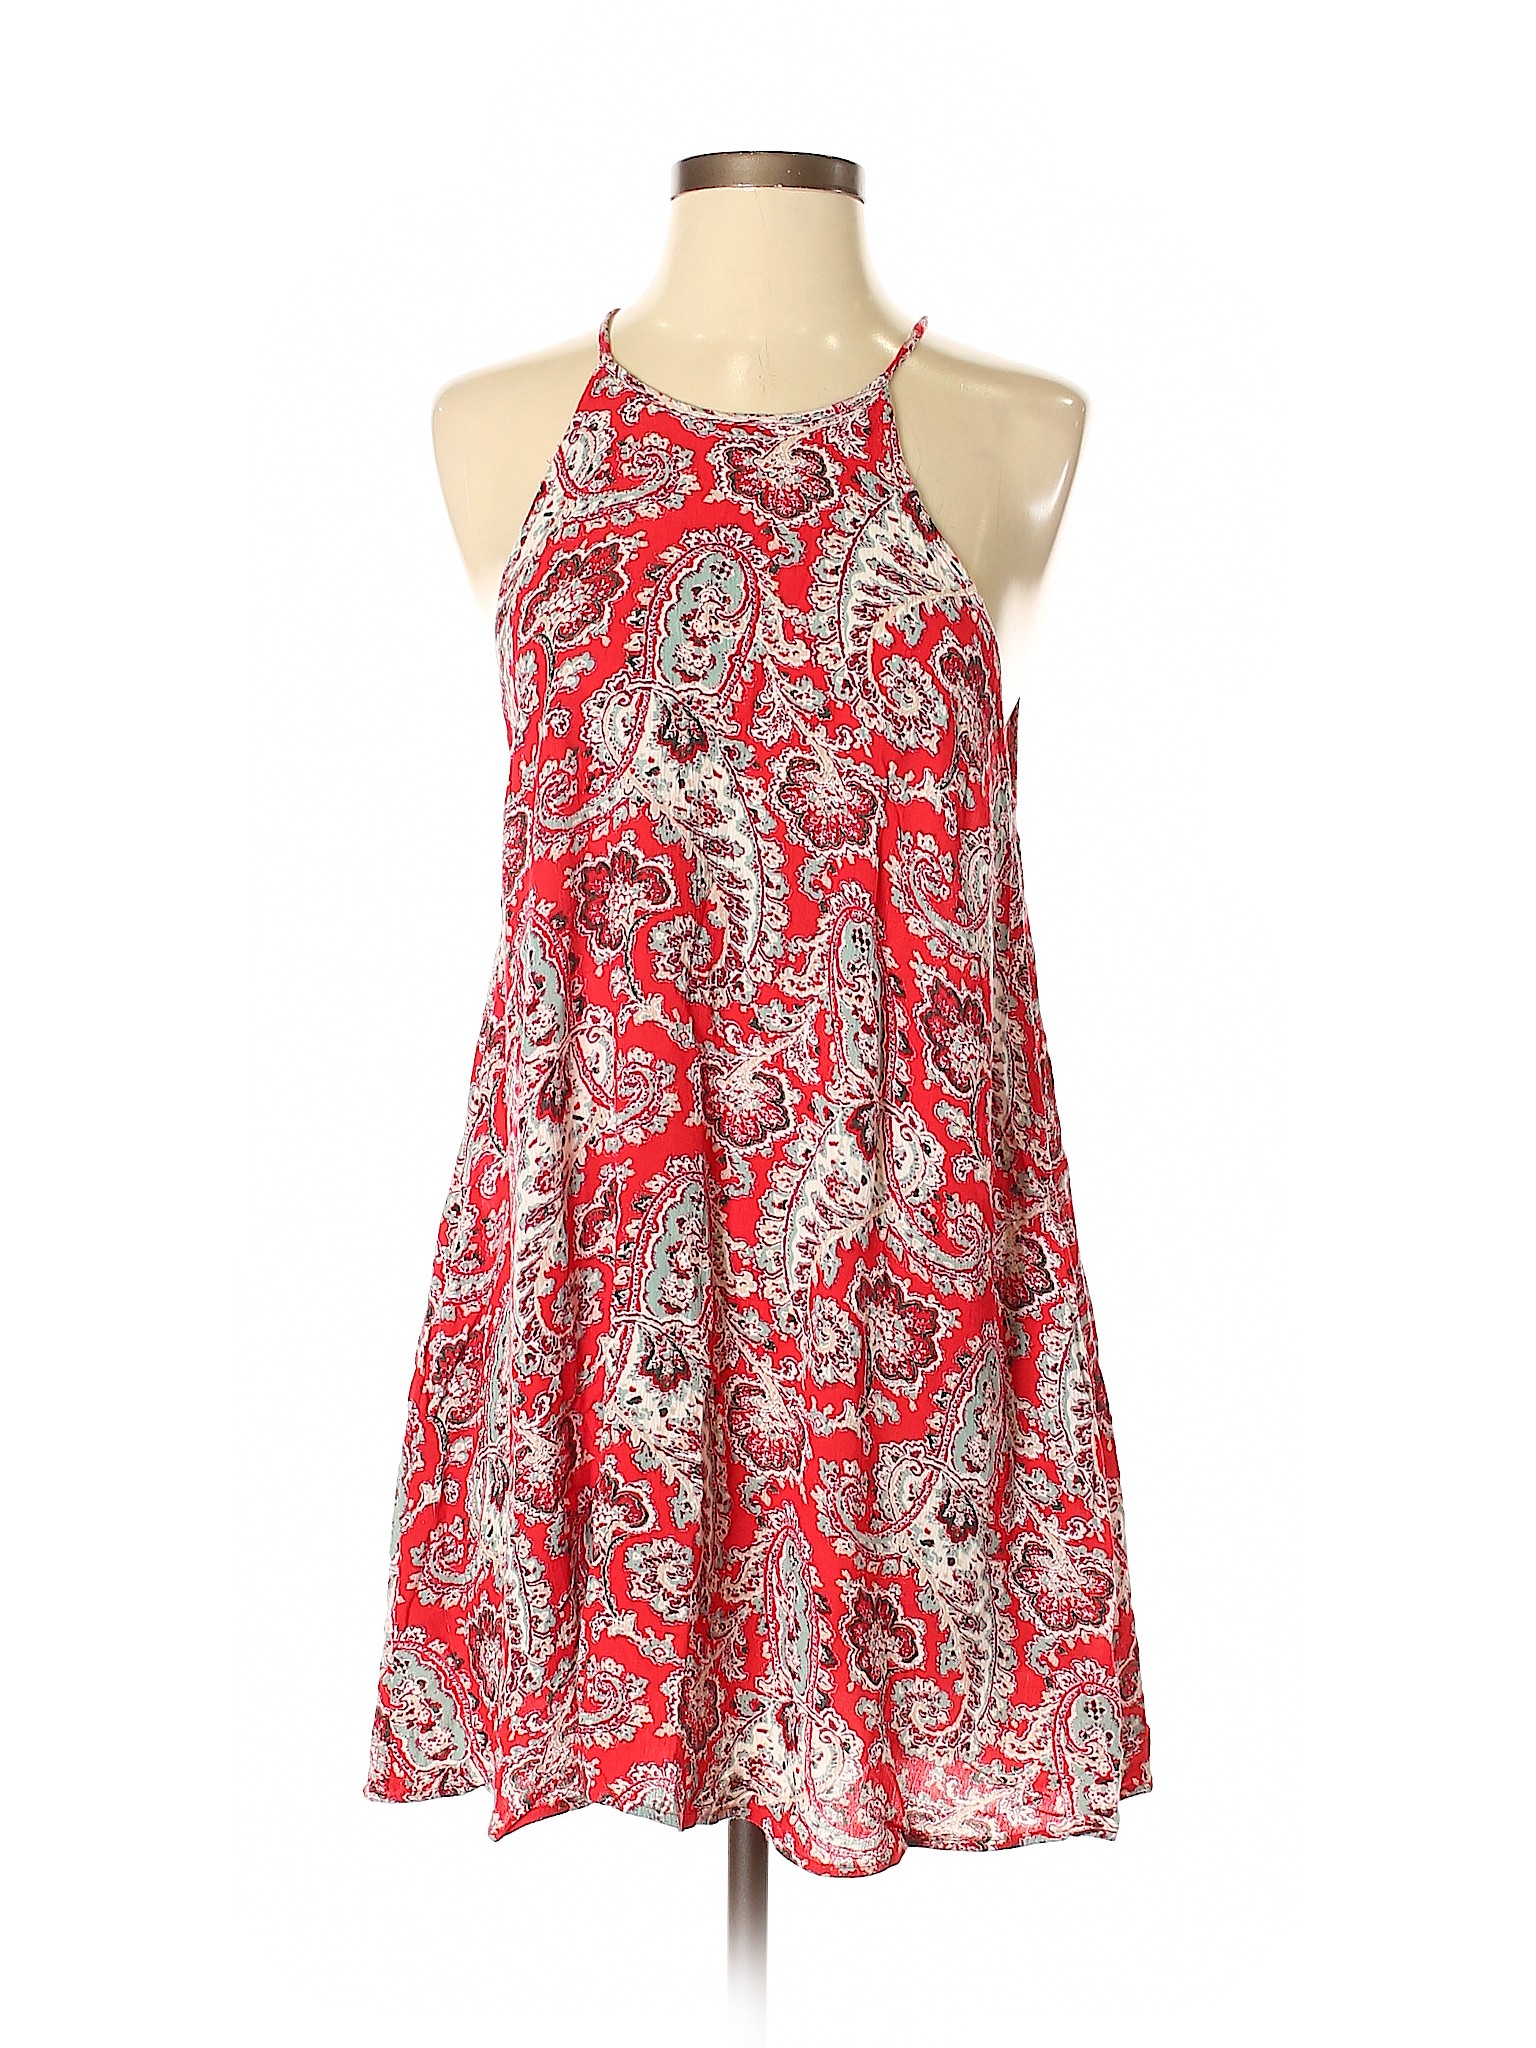 American Eagle Outfitters Women Red Casual Dress XS | eBay